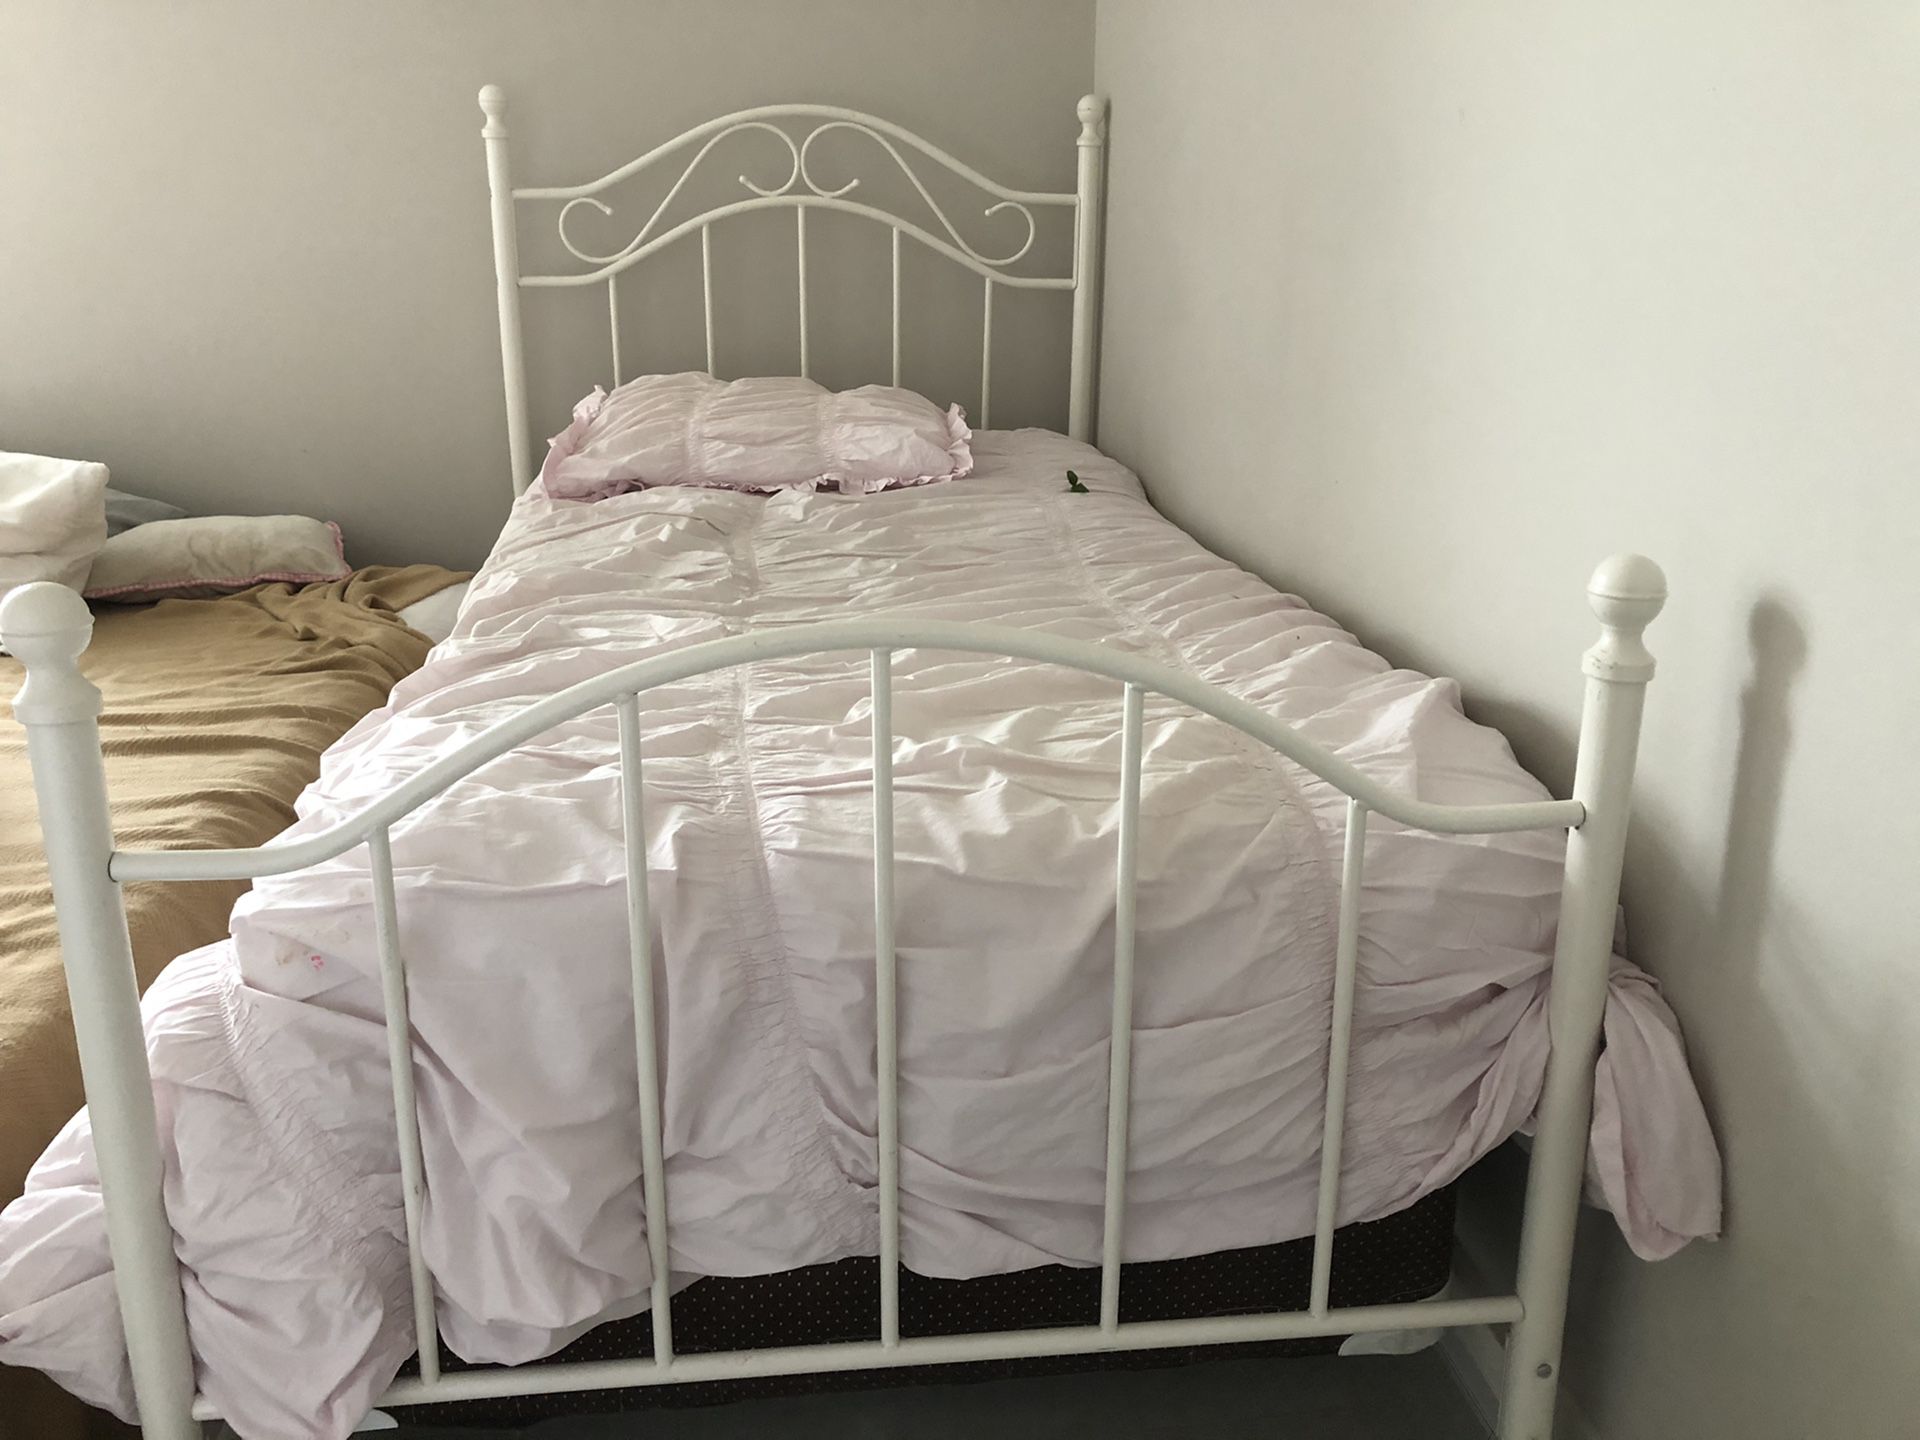 Twin bed frame - mattress available